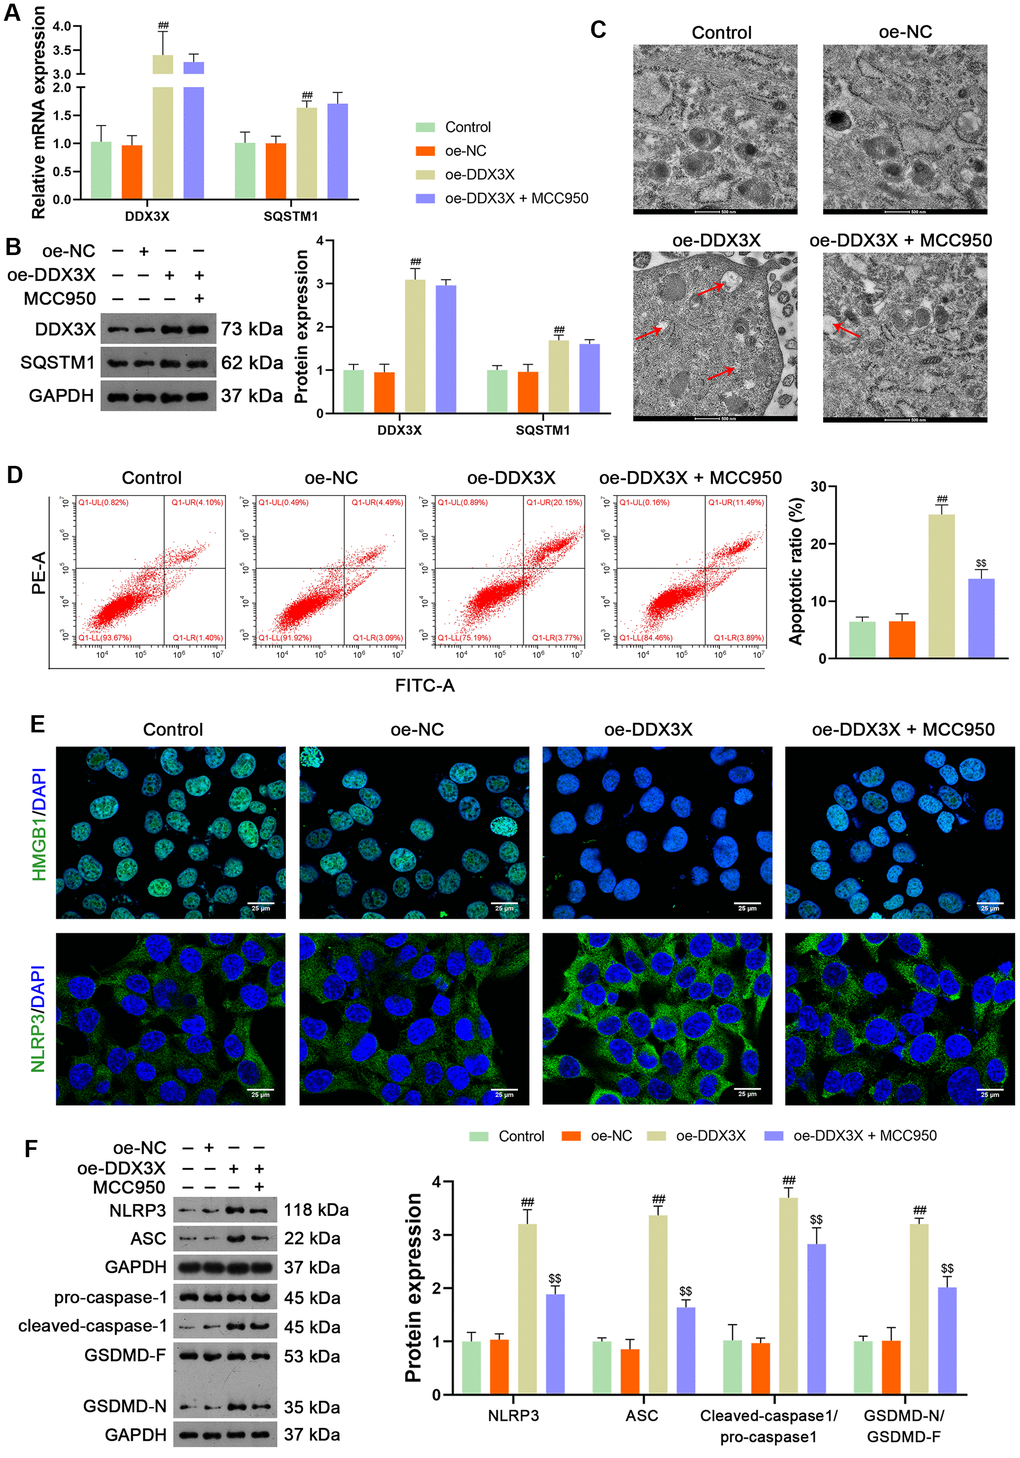 DDX3X overexpression promotes NLRP3/caspase-1/GSDMD-mediated pyroptosis in LUAD cells. (A, B) Relative mRNA and protein expression of DDX3X and SQSTM1 in H1299 cells were measured by RT-qPCR and western blotting, respectively. (C) Cell pyroptosis was observed by TEM. Scale bar = 500 nm. (D) H1299 cell apoptosis was measured by flow cytometry. (E) Expression of HMGB1 and NLRP3 were measured by immunofluorescence staining. Scale bar = 25 μm. (F) Relative protein expression of NLRP3/caspase-1/GSDMD pathway-related proteins was measured by western blotting. ##p . oe-NC; $$p . oe-DDX3X. DDX3X, DEAD-Box helicase 3 X-Linked; GSDMD, gasdermin D; LUAD, lung adenocarcinoma; NLRP3, NOD-like receptor pyrin 3; RT-qPCR, reverse transcription-quantitative PCR.